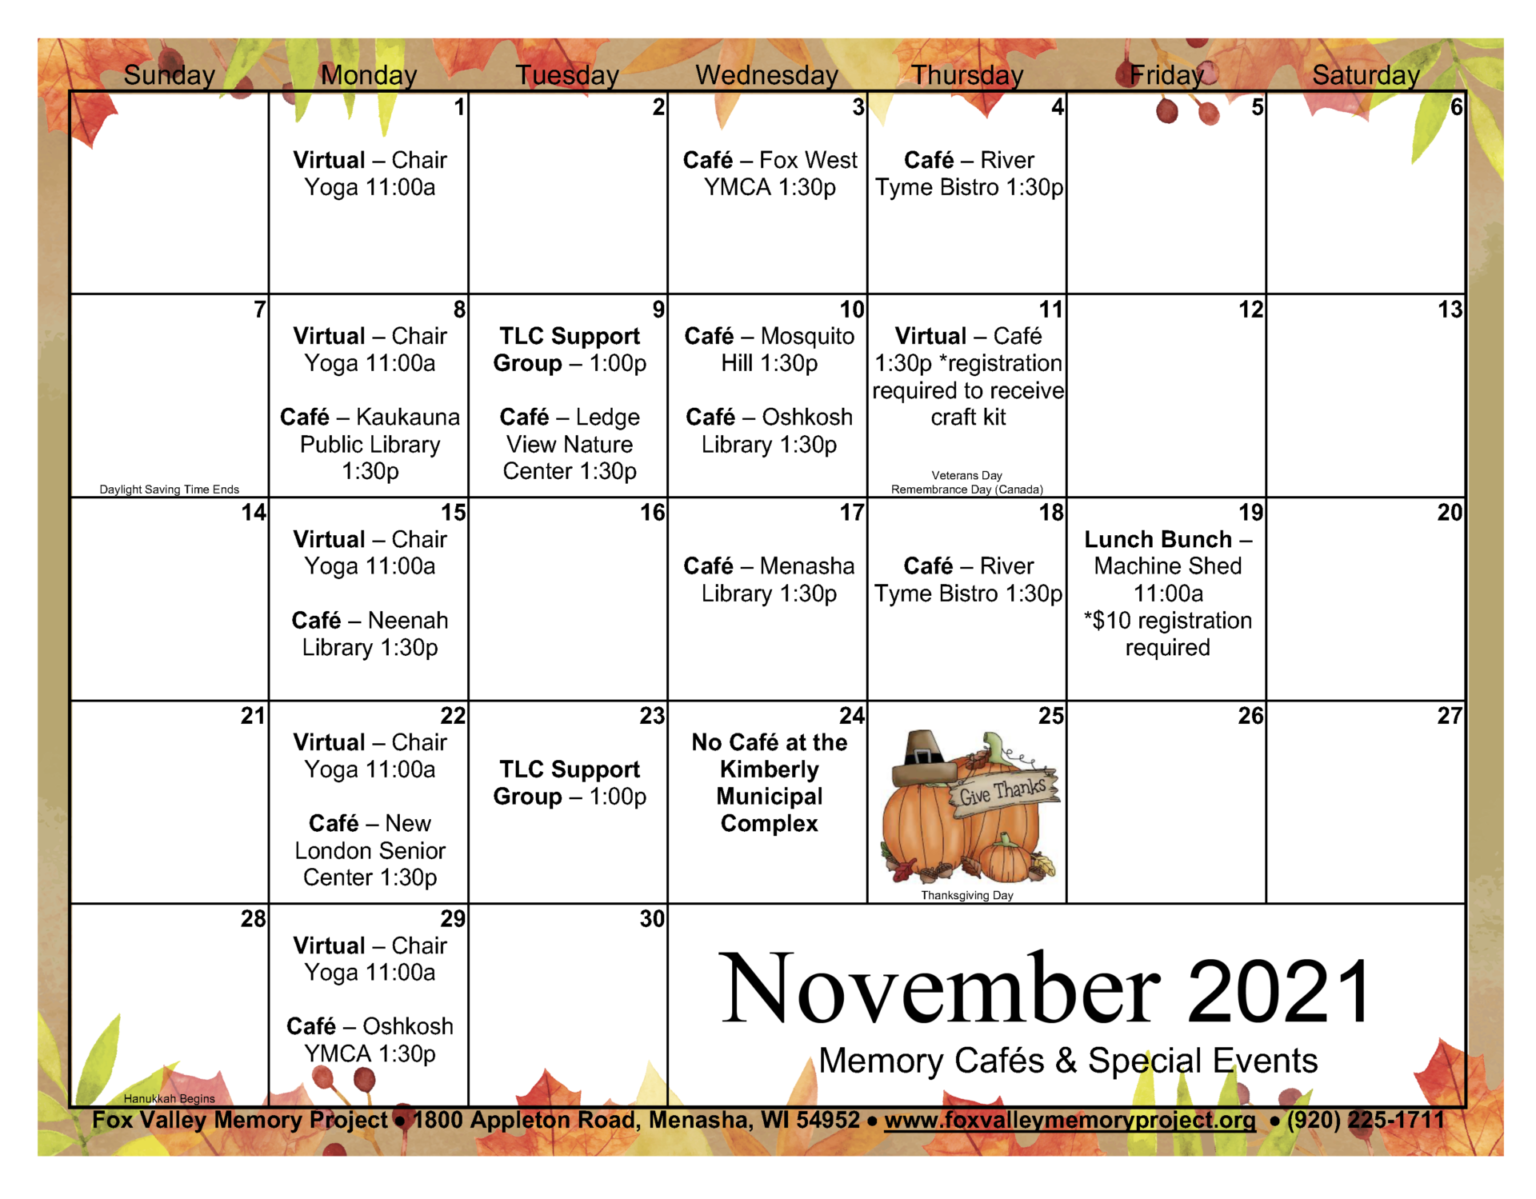 Calendar of dementia and memory loss participant and caregiver events for month of November including memory cafes